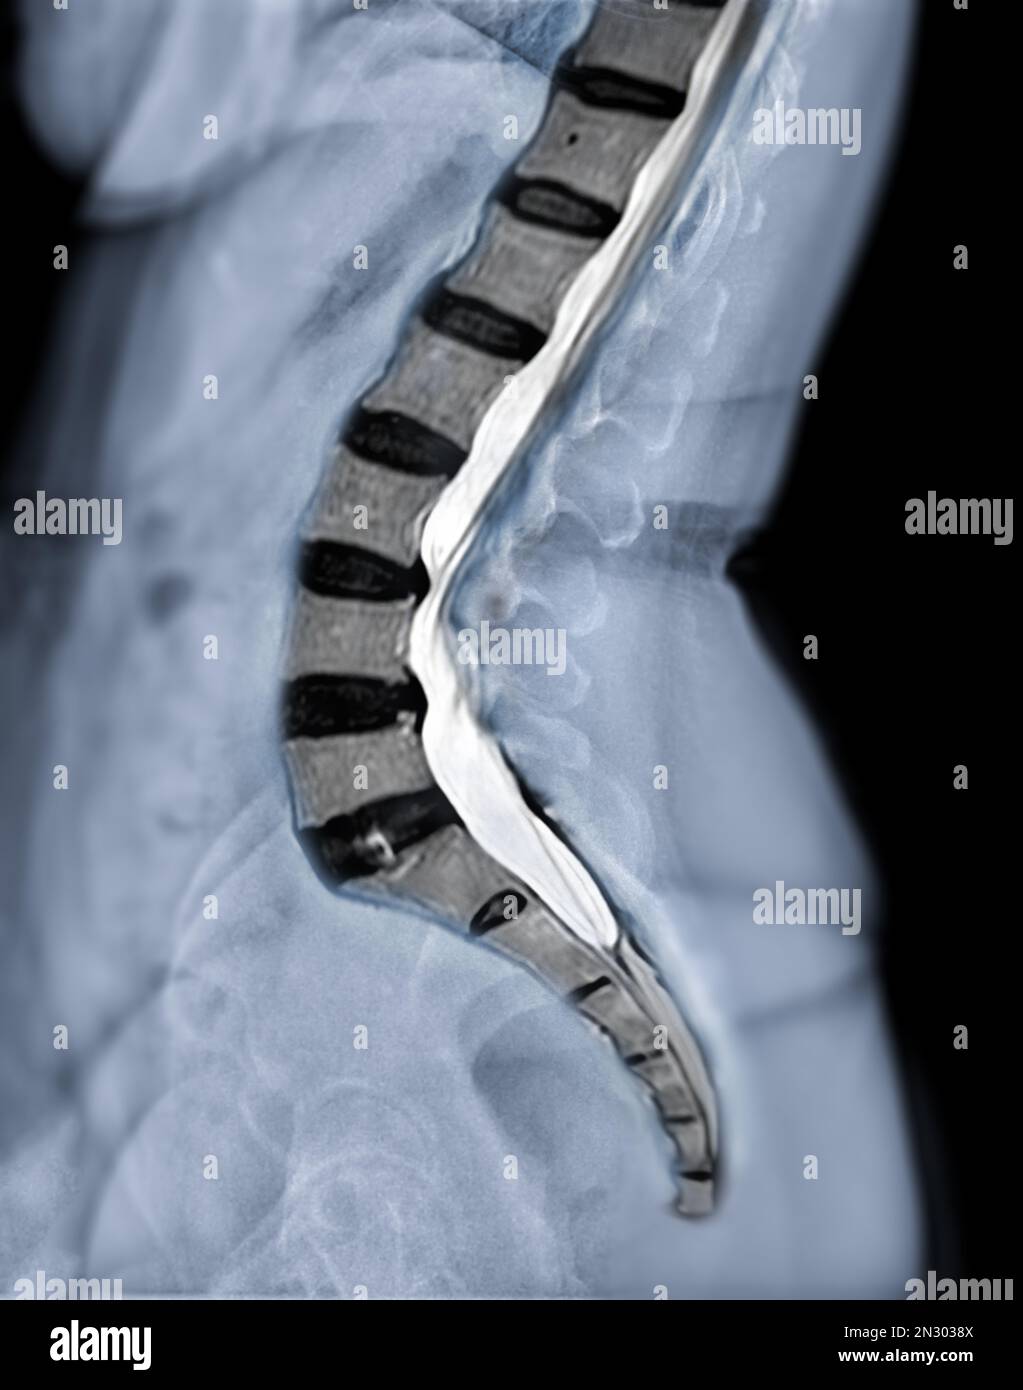 https://c8.alamy.com/comp/2N3038X/x-ray-image-of-lumbar-spine-or-l-s-spine-lateral-view-with-mri-l-s-spine-for-diagnosis-lower-back-pain-2N3038X.jpg